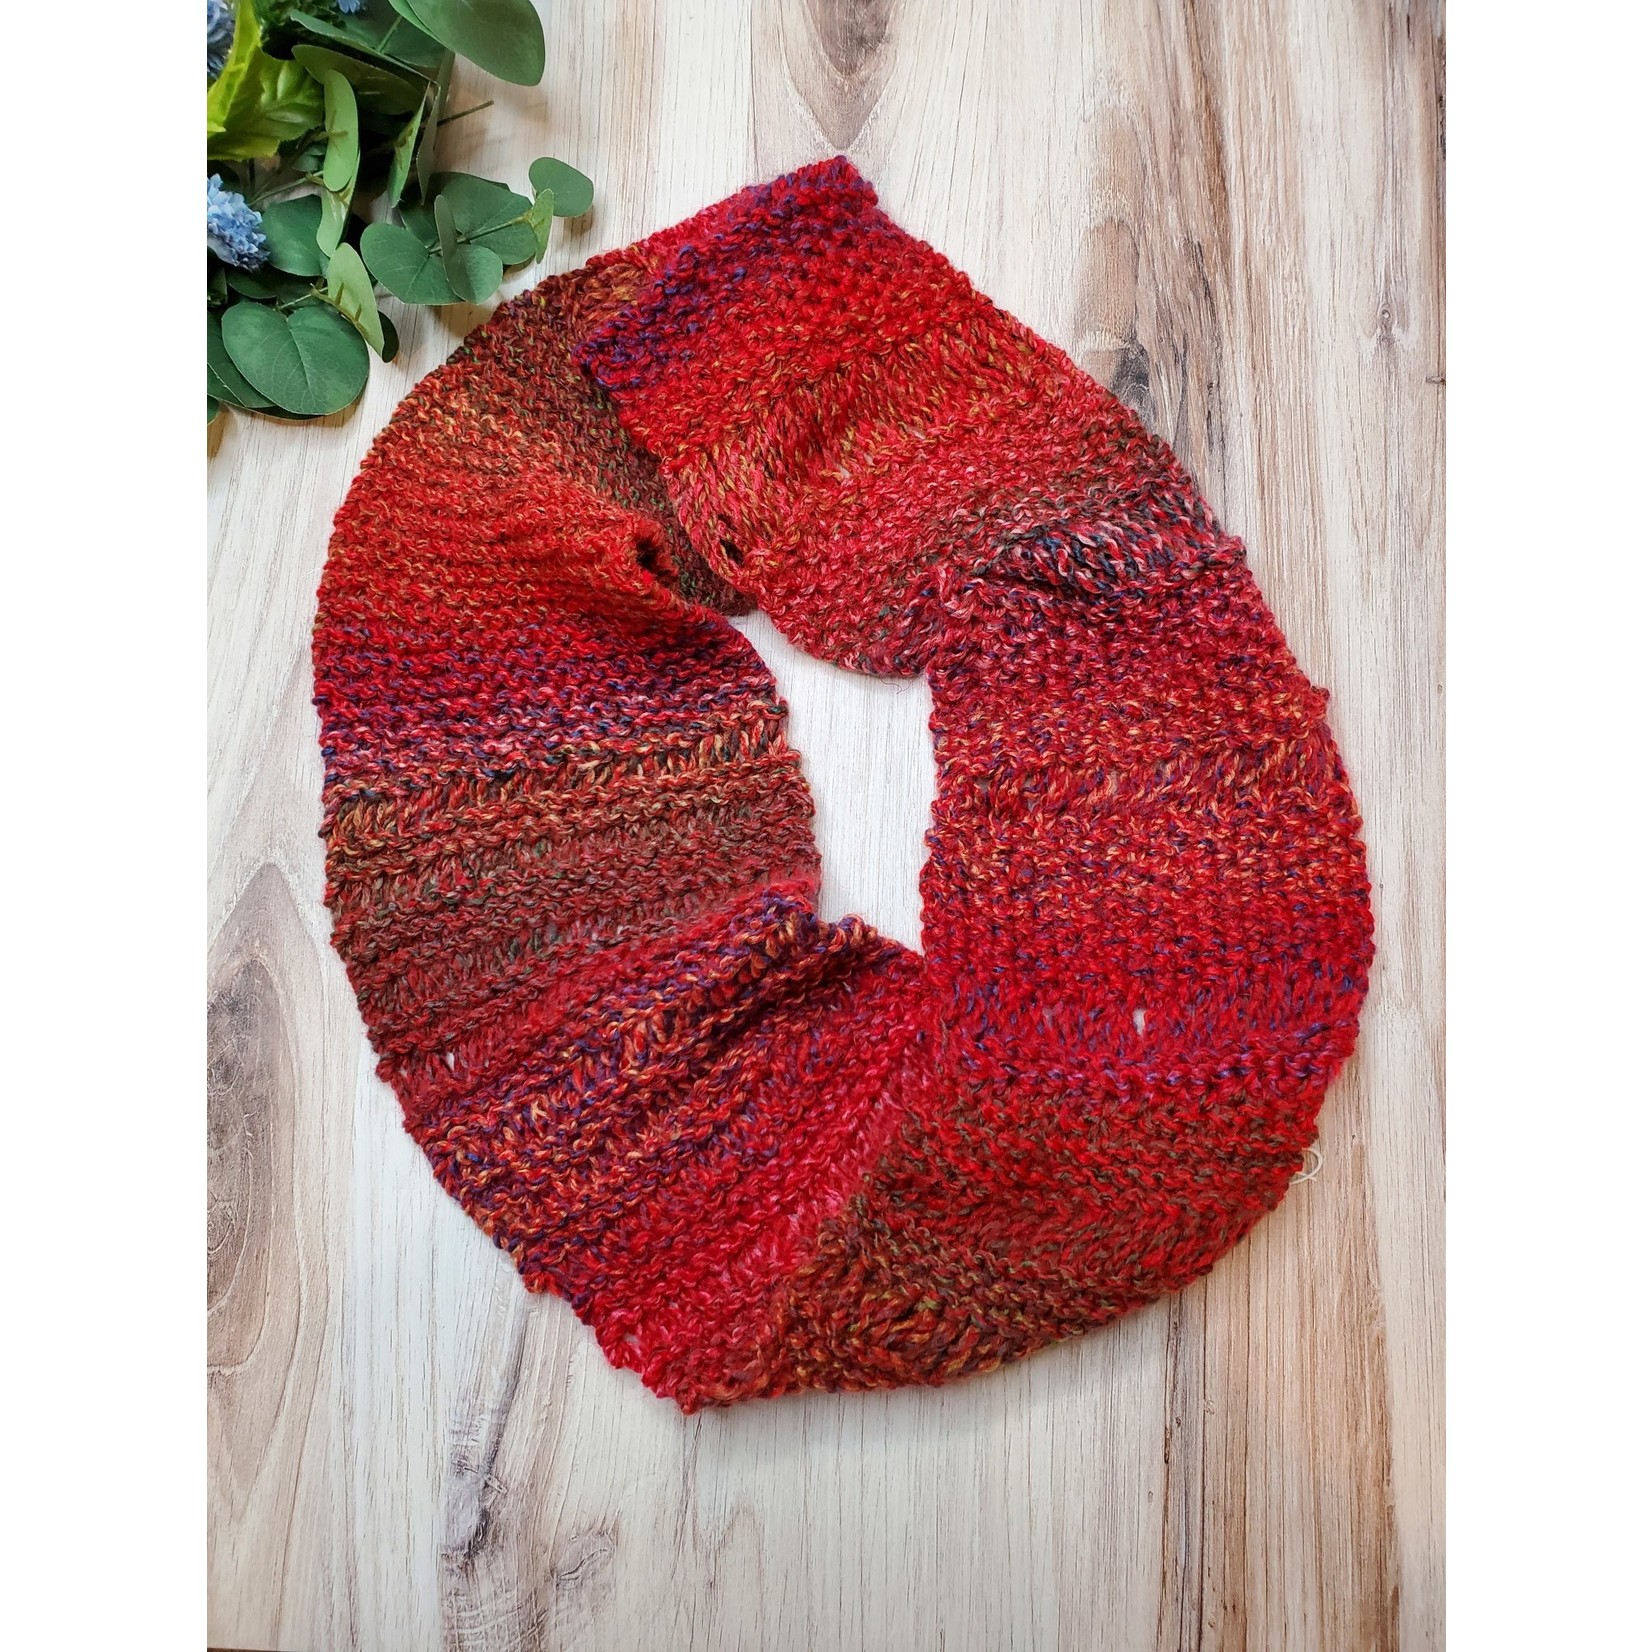 Roan's Repertoire Knitted Infinity Scarf - Autumn Multicolor